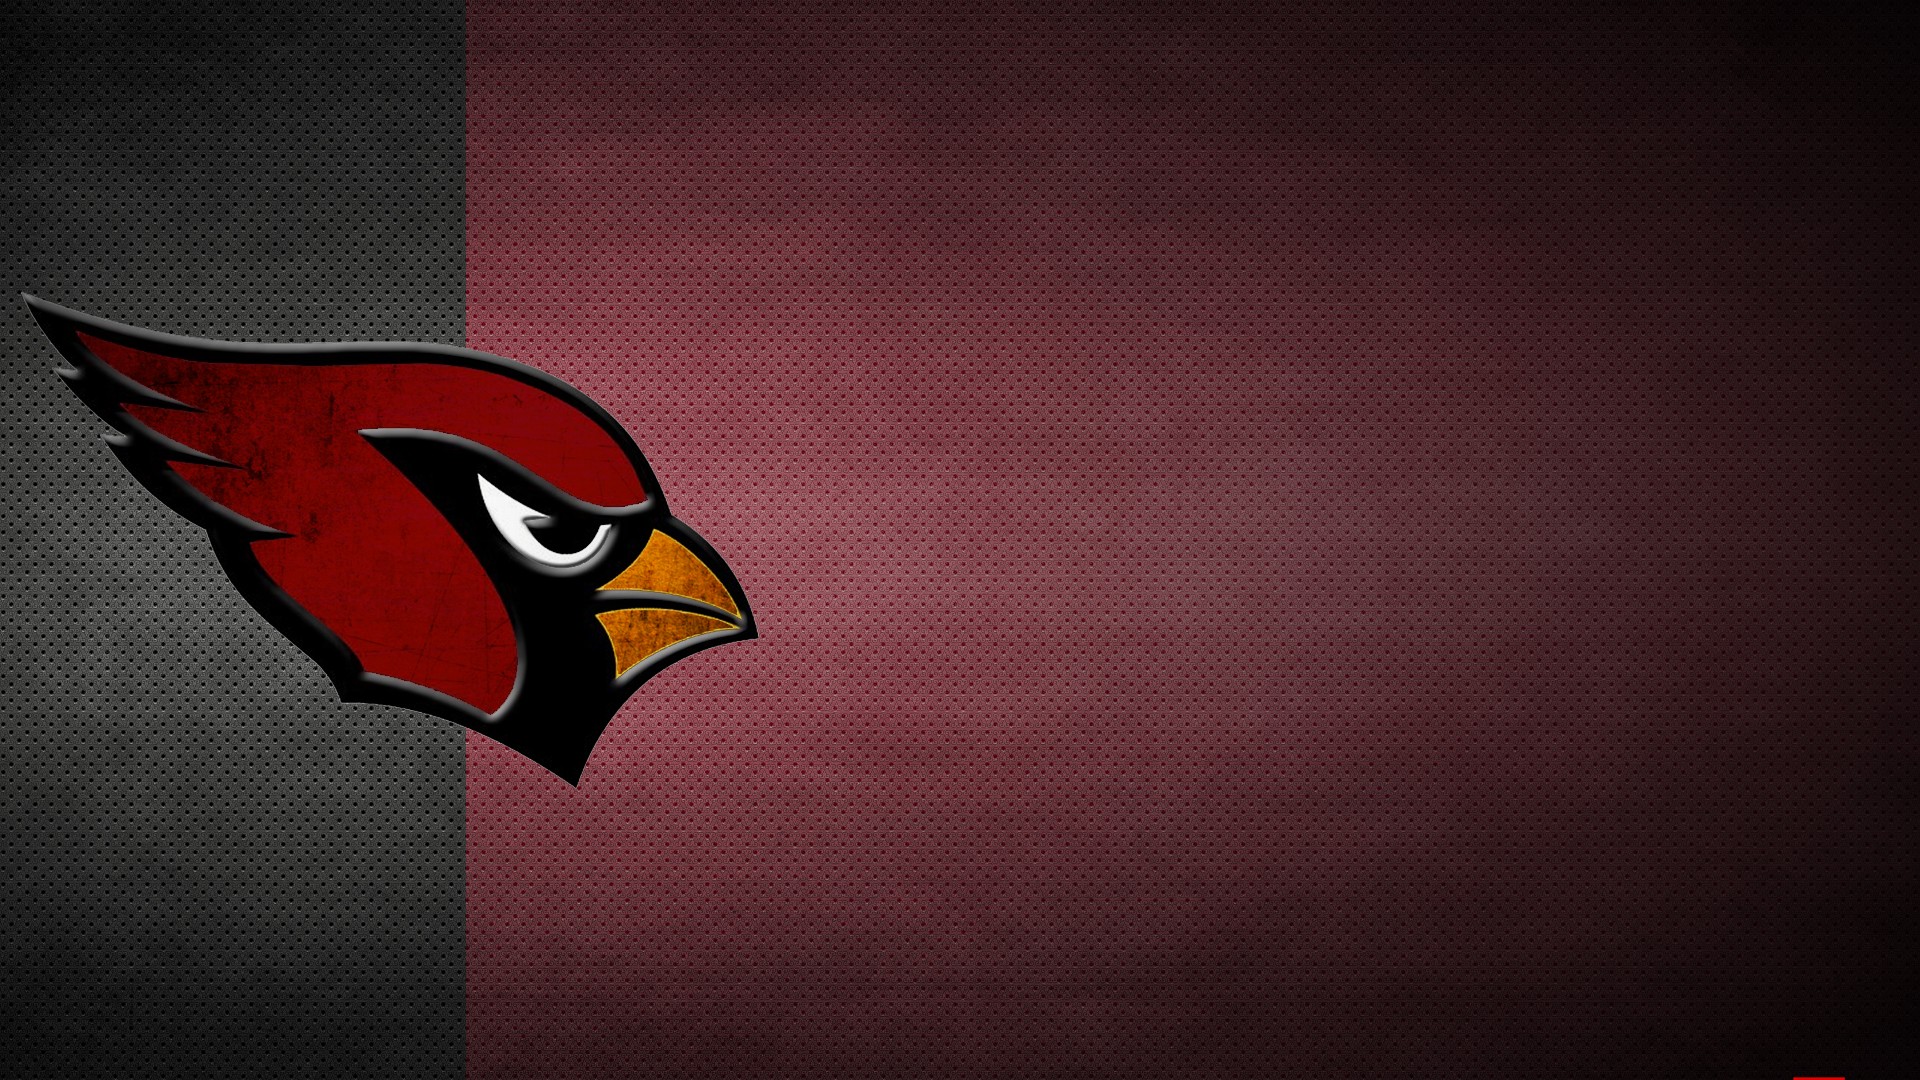 HD Cardinals Backgrounds With high-resolution 1920X1080 pixel. You can use this wallpaper for your Mac or Windows Desktop Background, iPhone, Android or Tablet and another Smartphone device